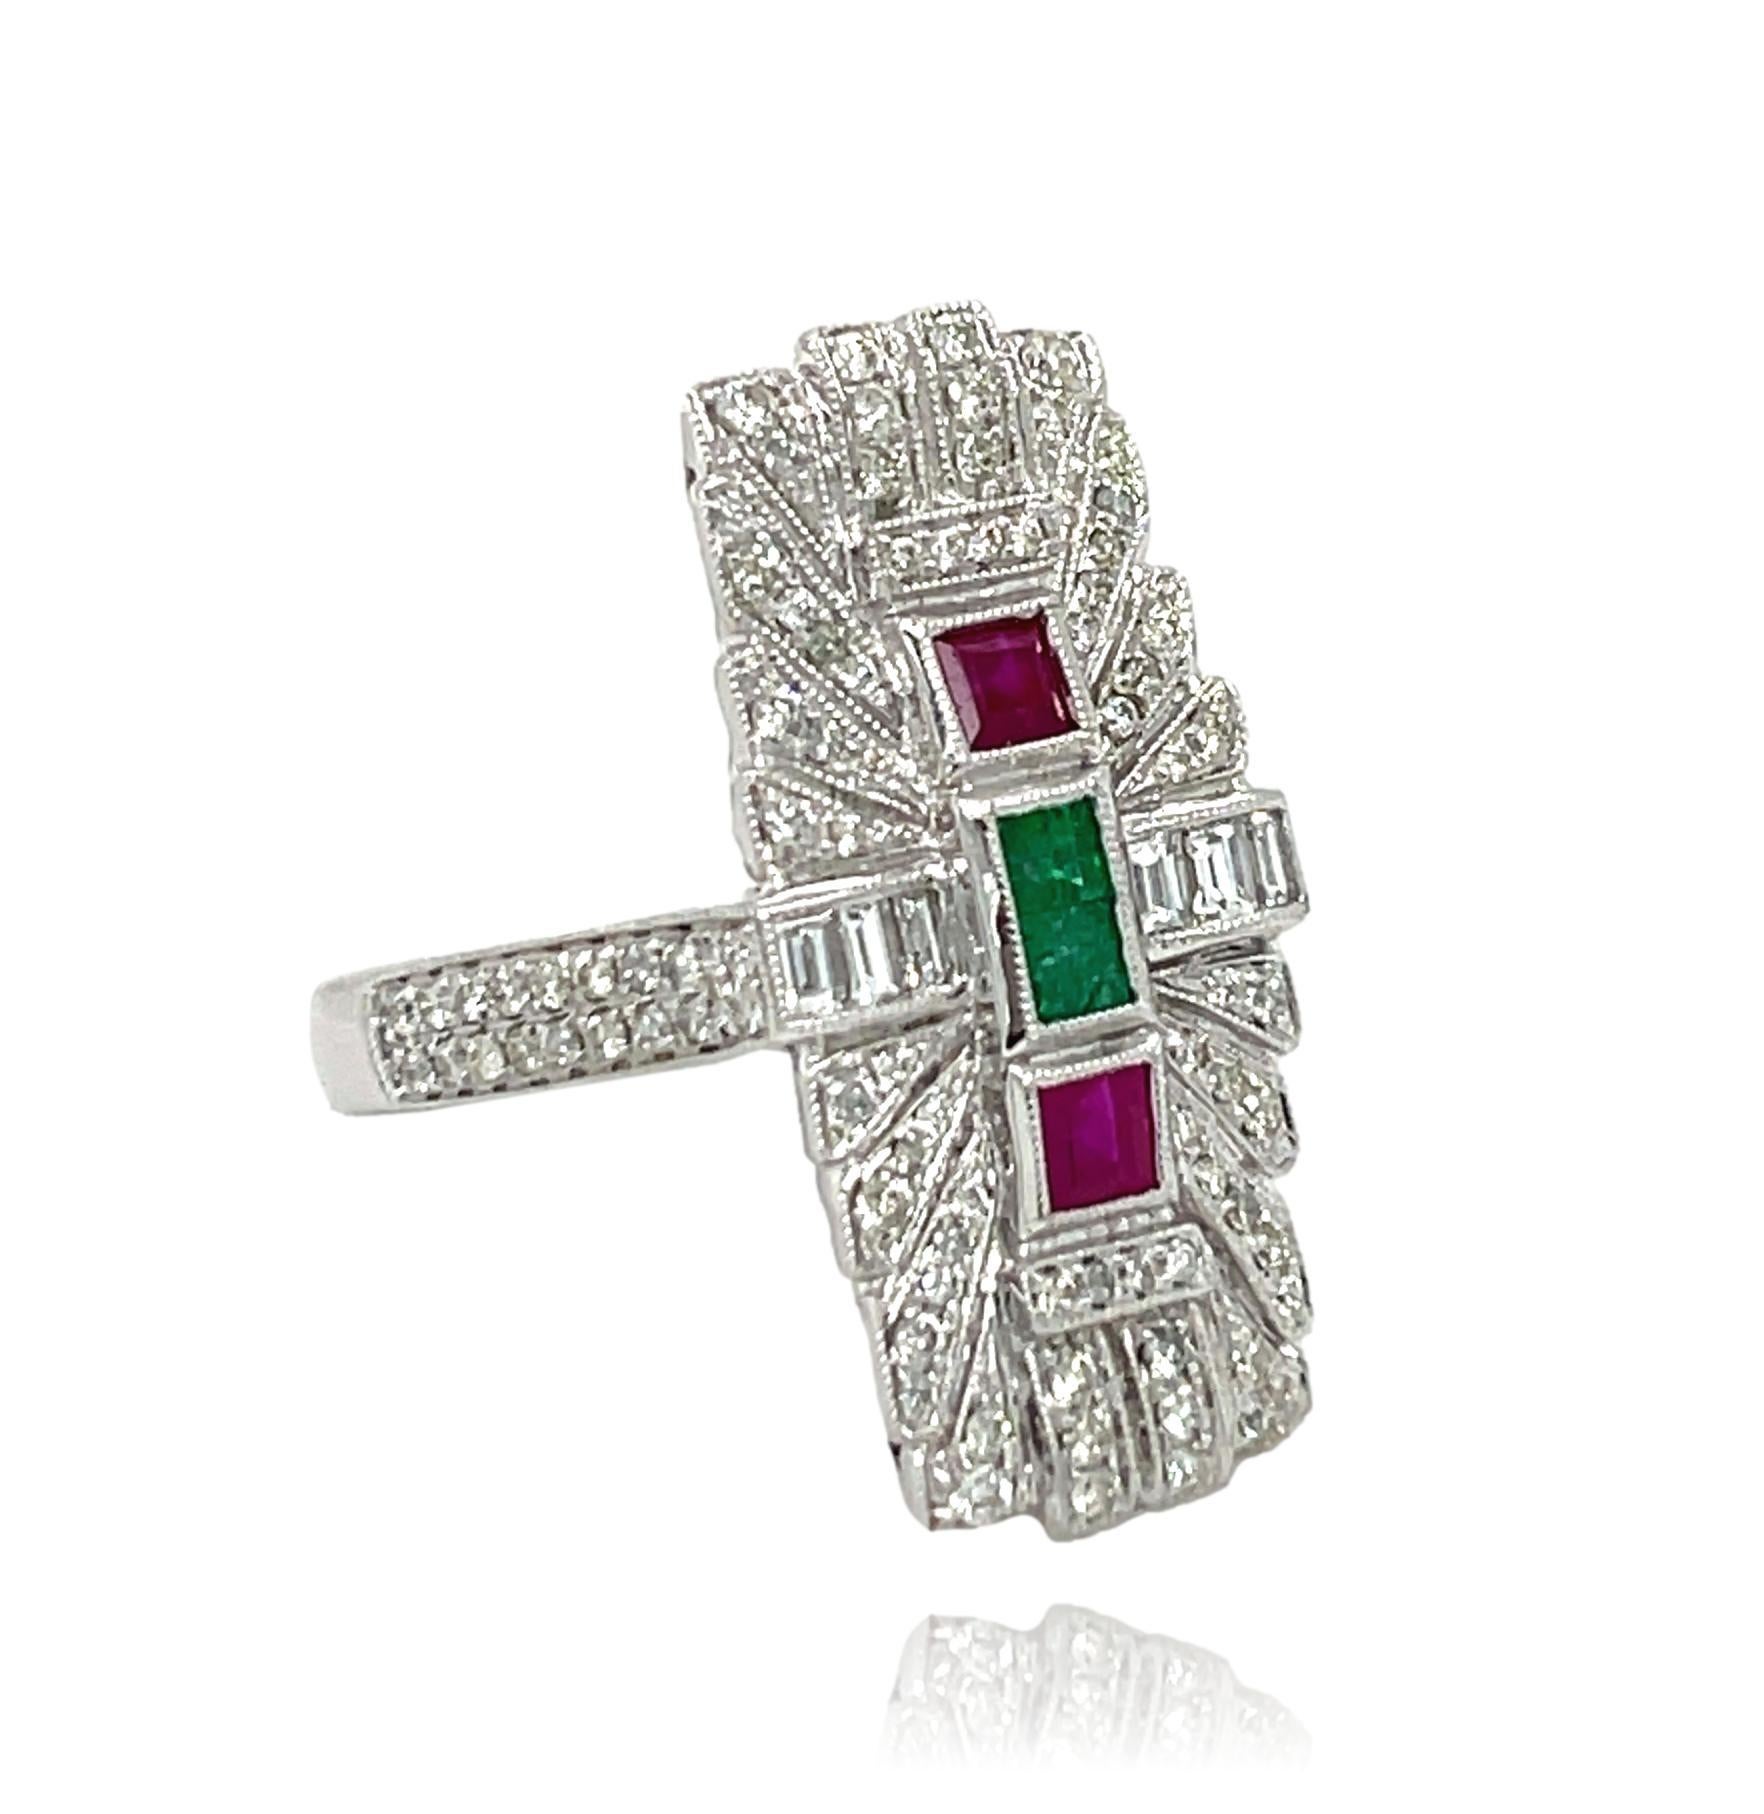 This stunning Antique ring has natural square shaped Emeralds and Rubies, and round and baguette Diamonds set in 14 karat white gold. There are sparkling brilliant cut round diamonds on the shank for a delicate accent. This ring will be shipped in a